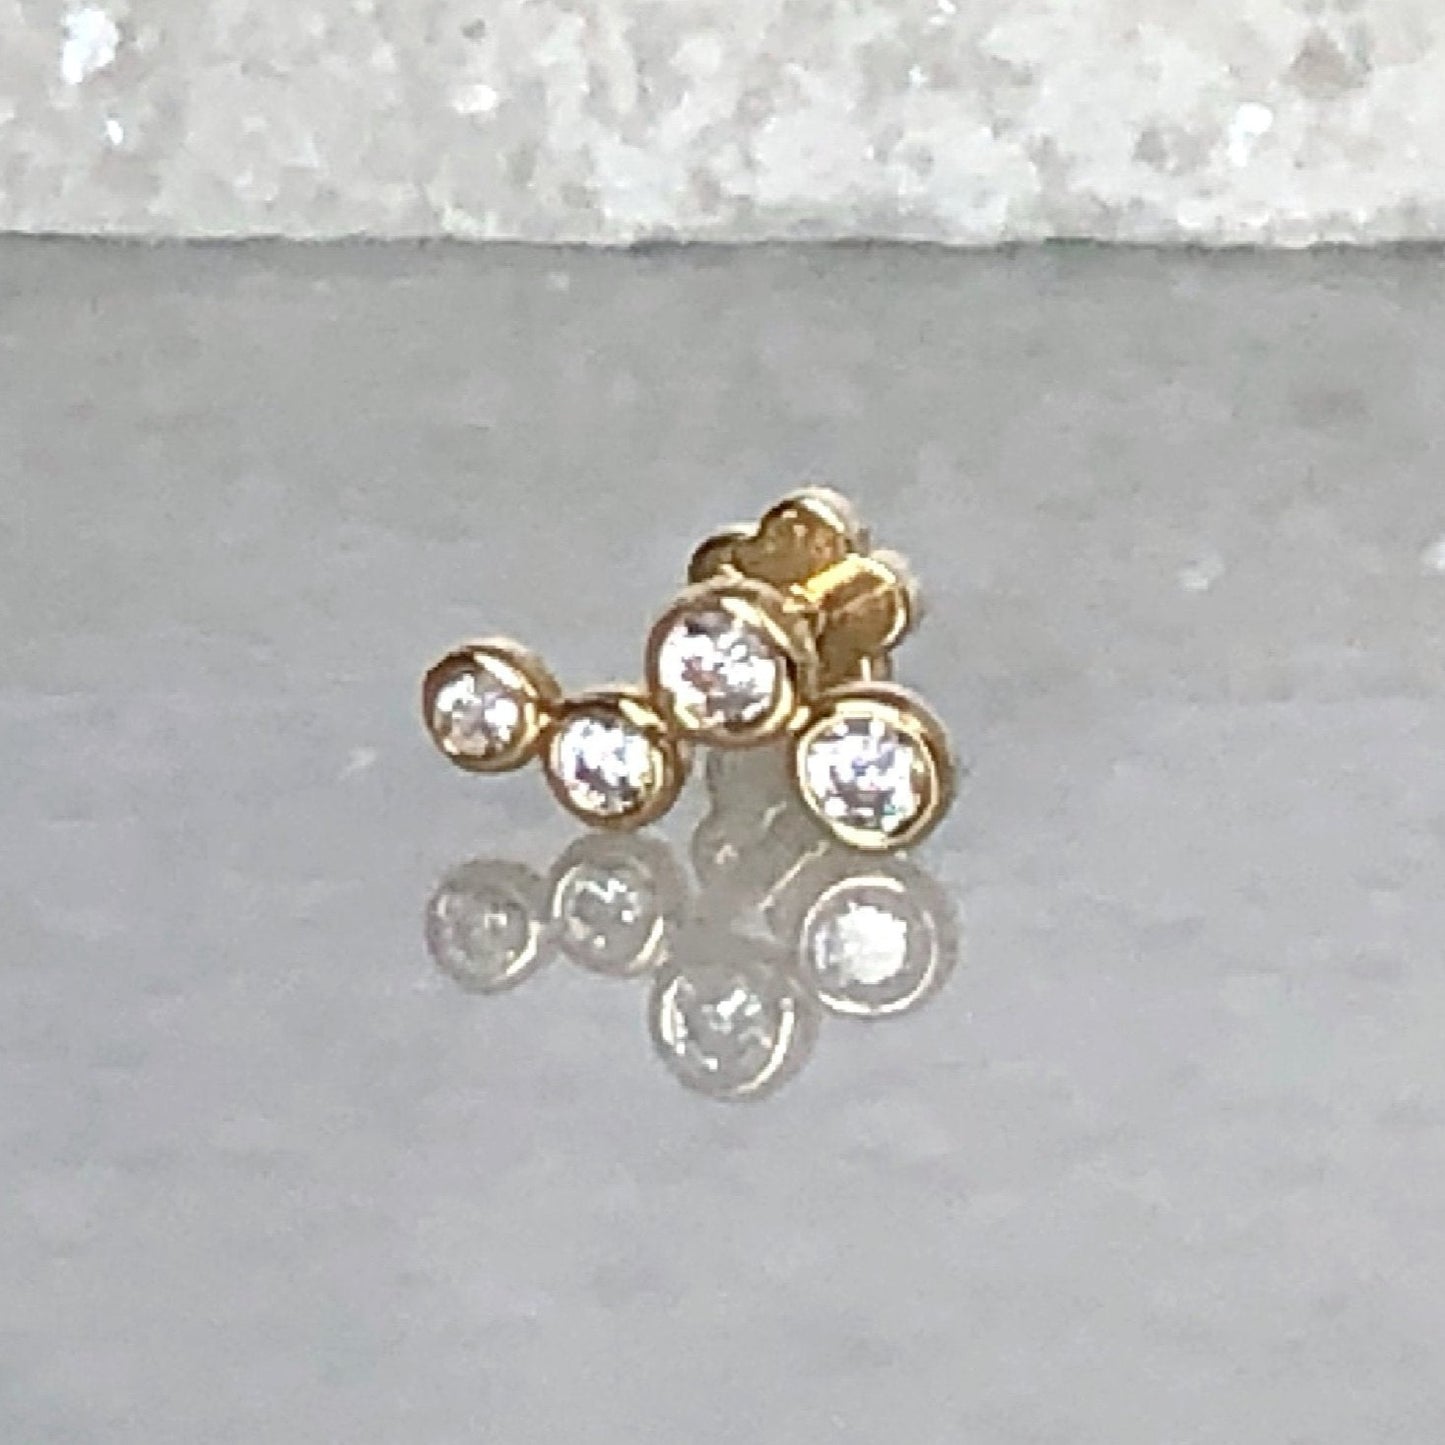 Four Stone Stud Earring | Piercing Earrings | Solid Gold Hypoallergenic Jewelry | Helix, Tragus, Cartilage | Two of Most Fine Jewelry